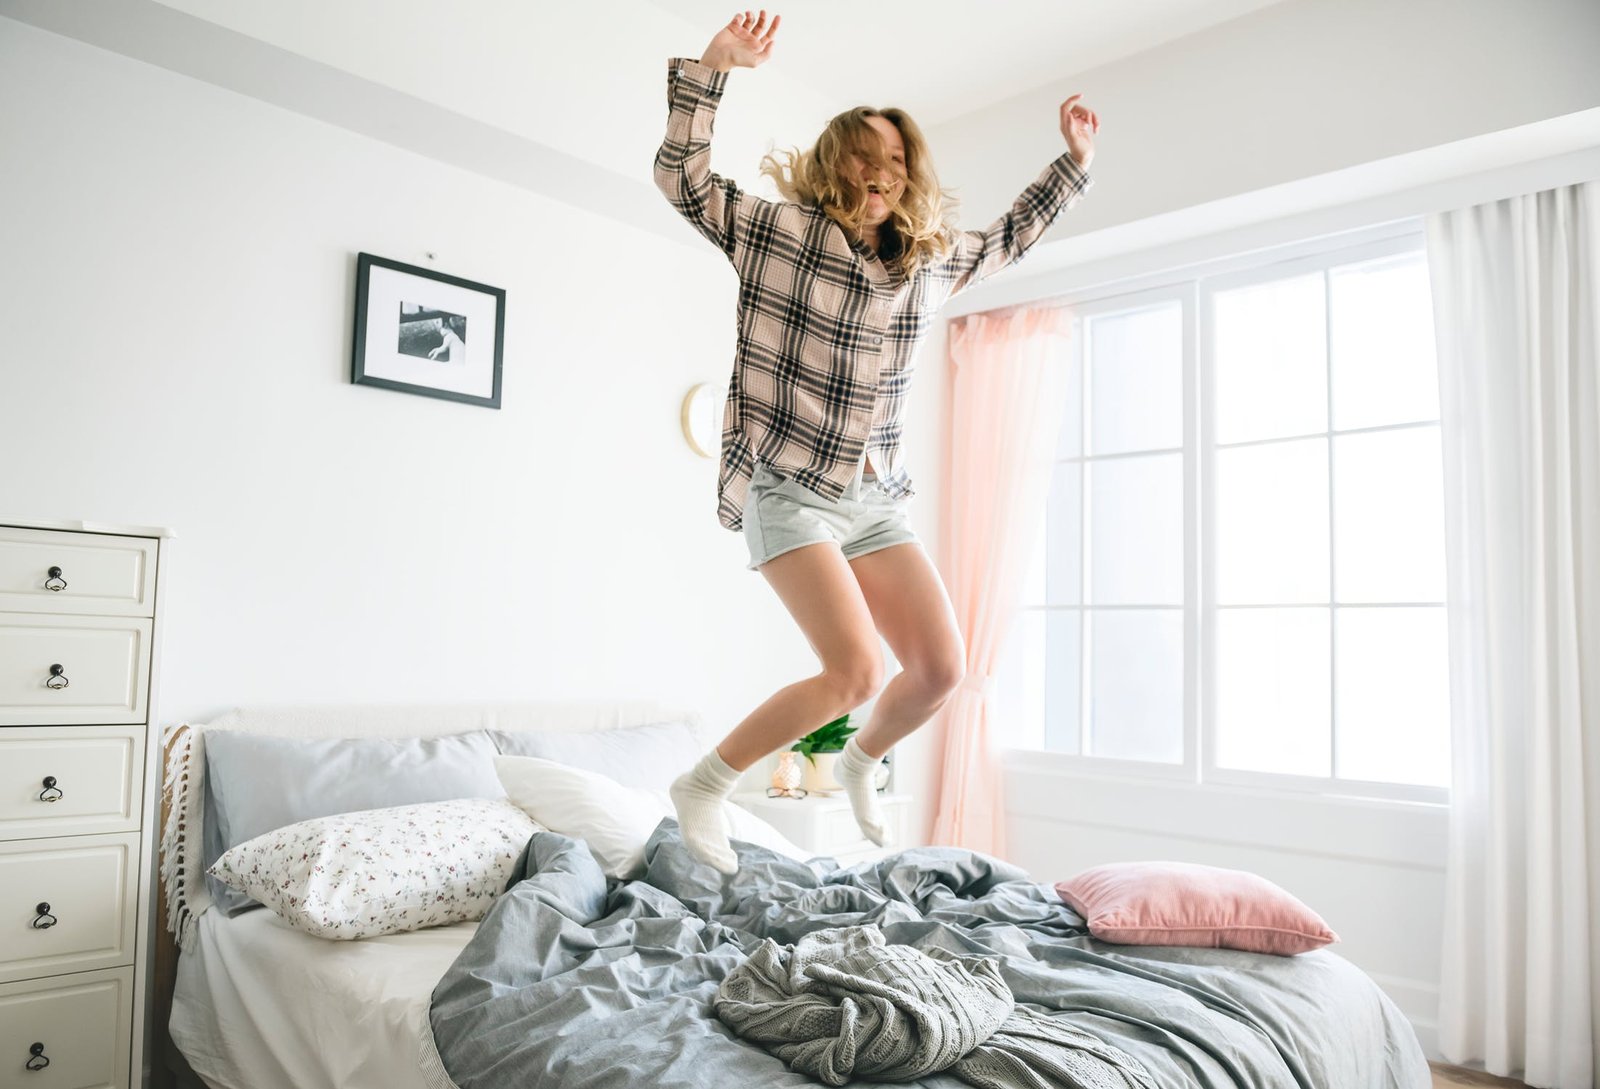 The Do's and Don'ts Of How To Care For Your Mattress